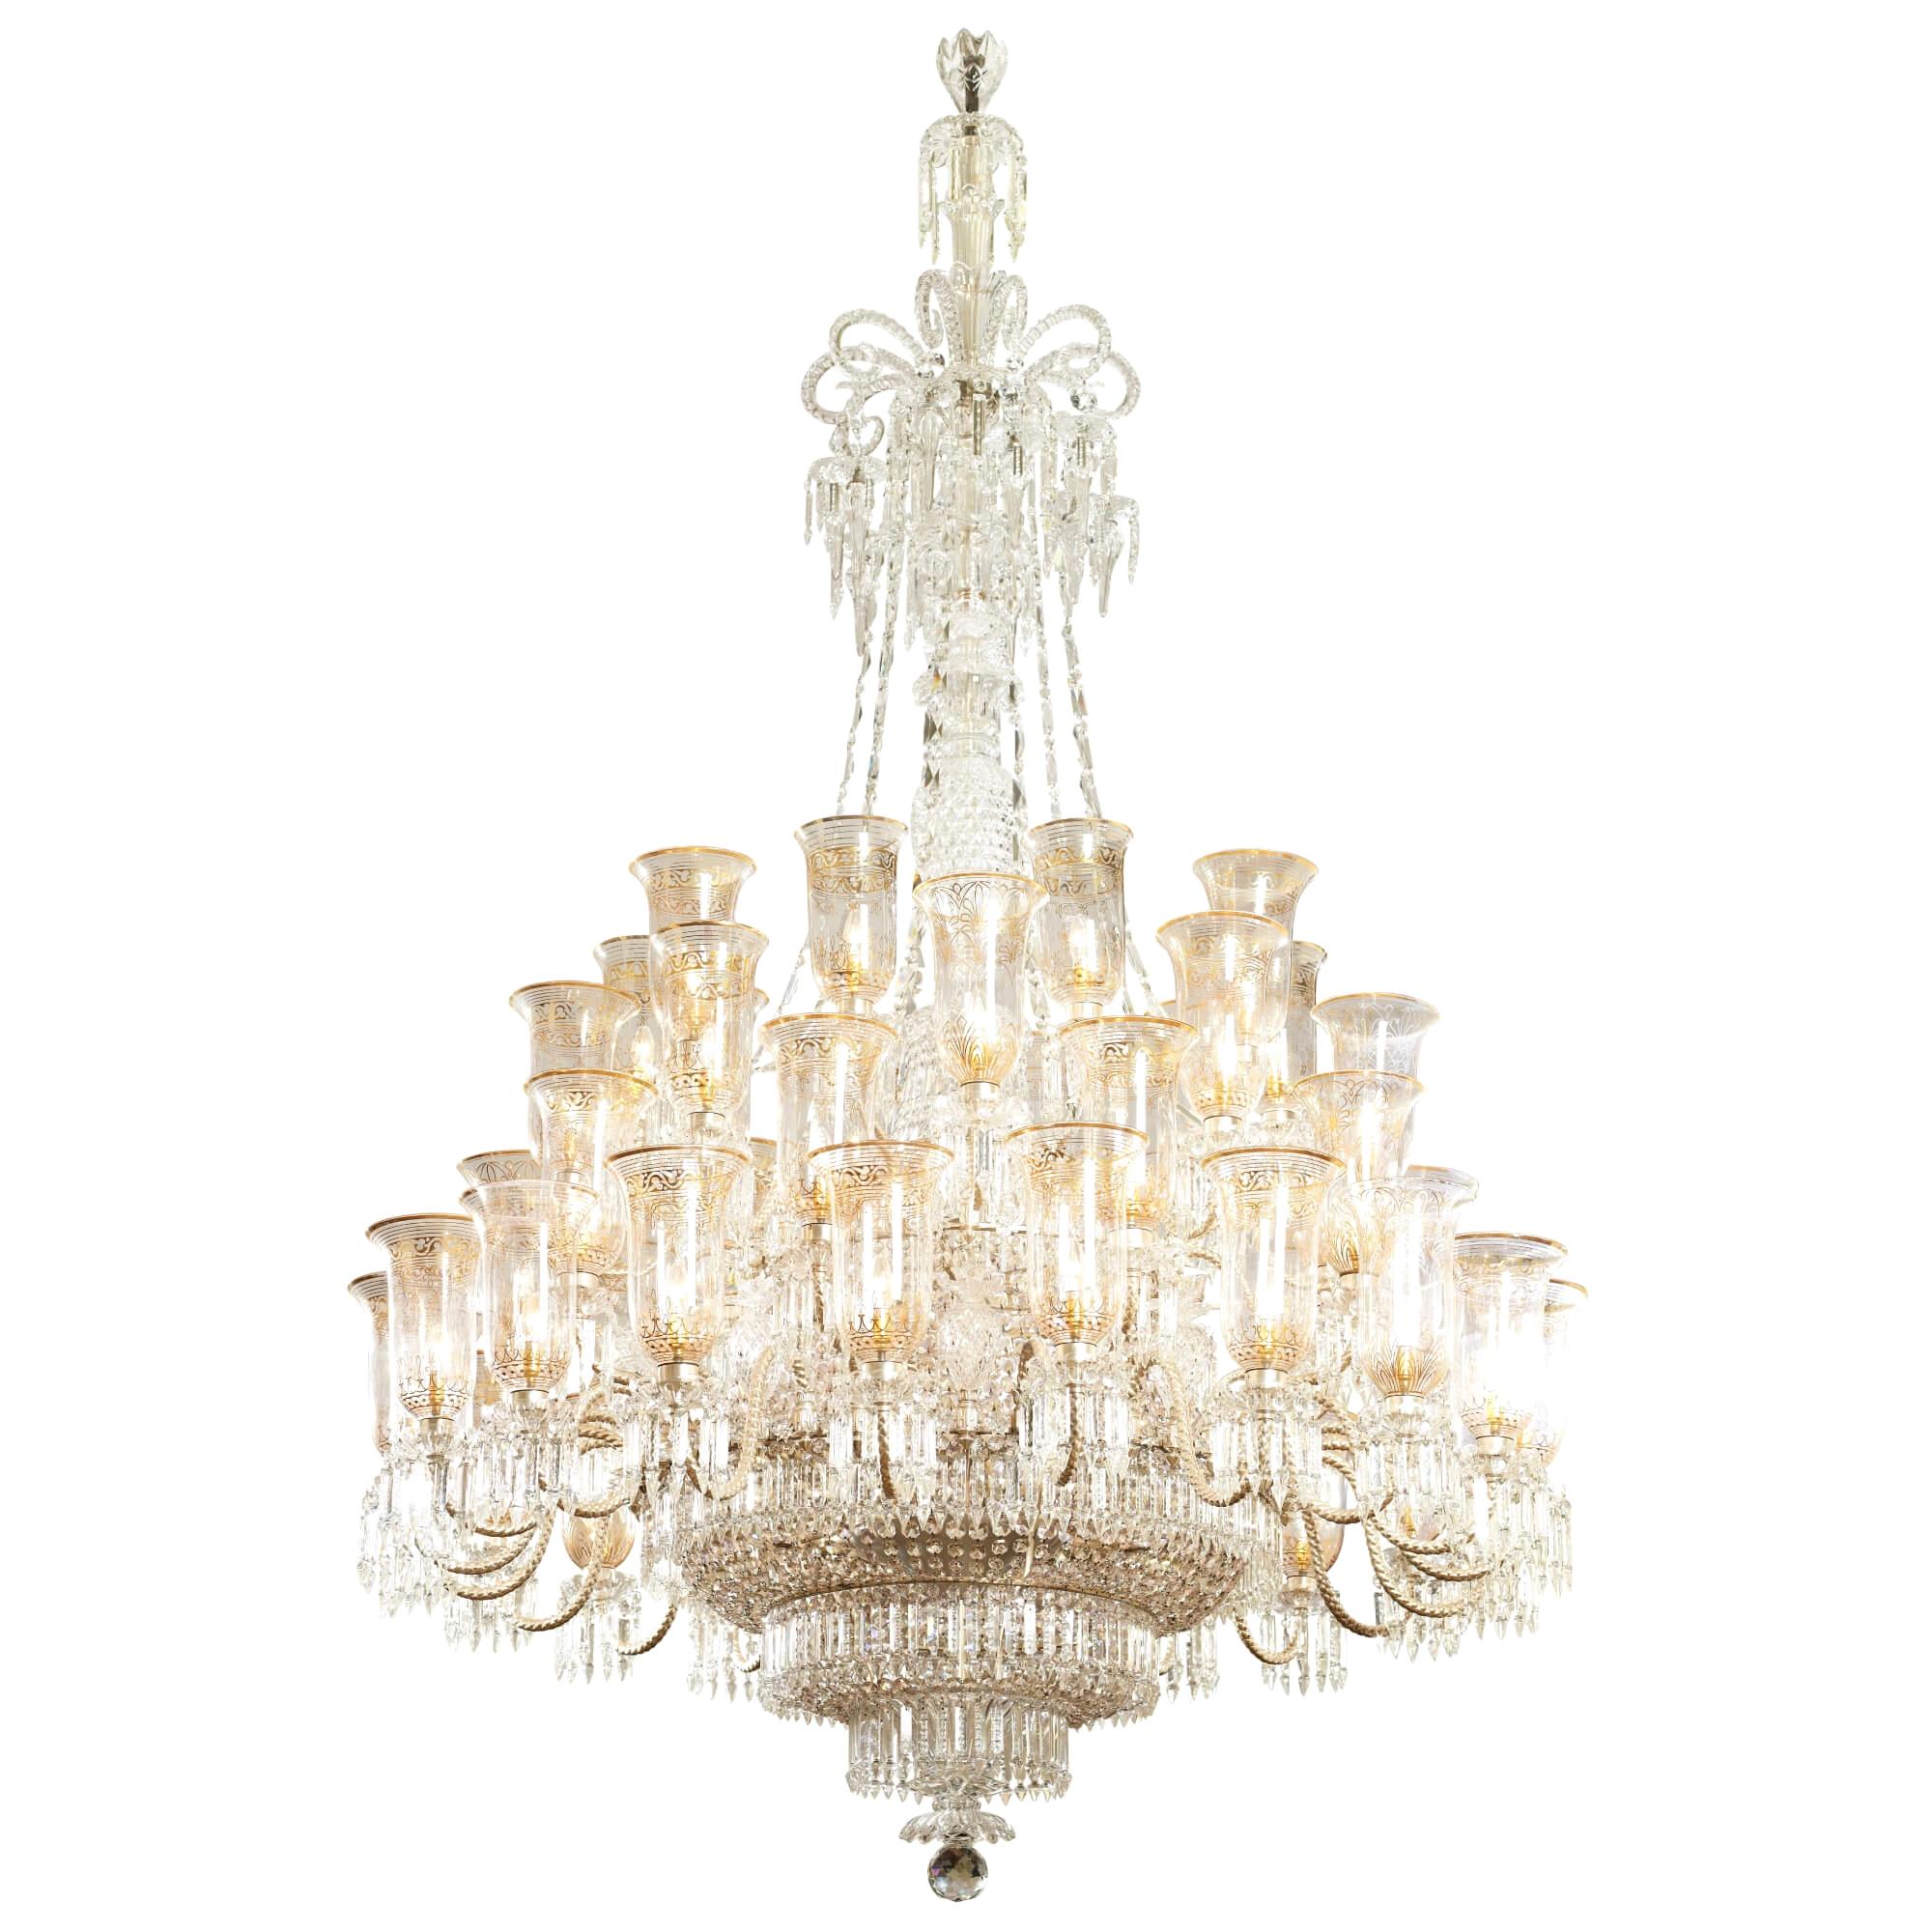 Victorian Period Cut Glass and Parcel-Gilt Chandelier by F & C Osler